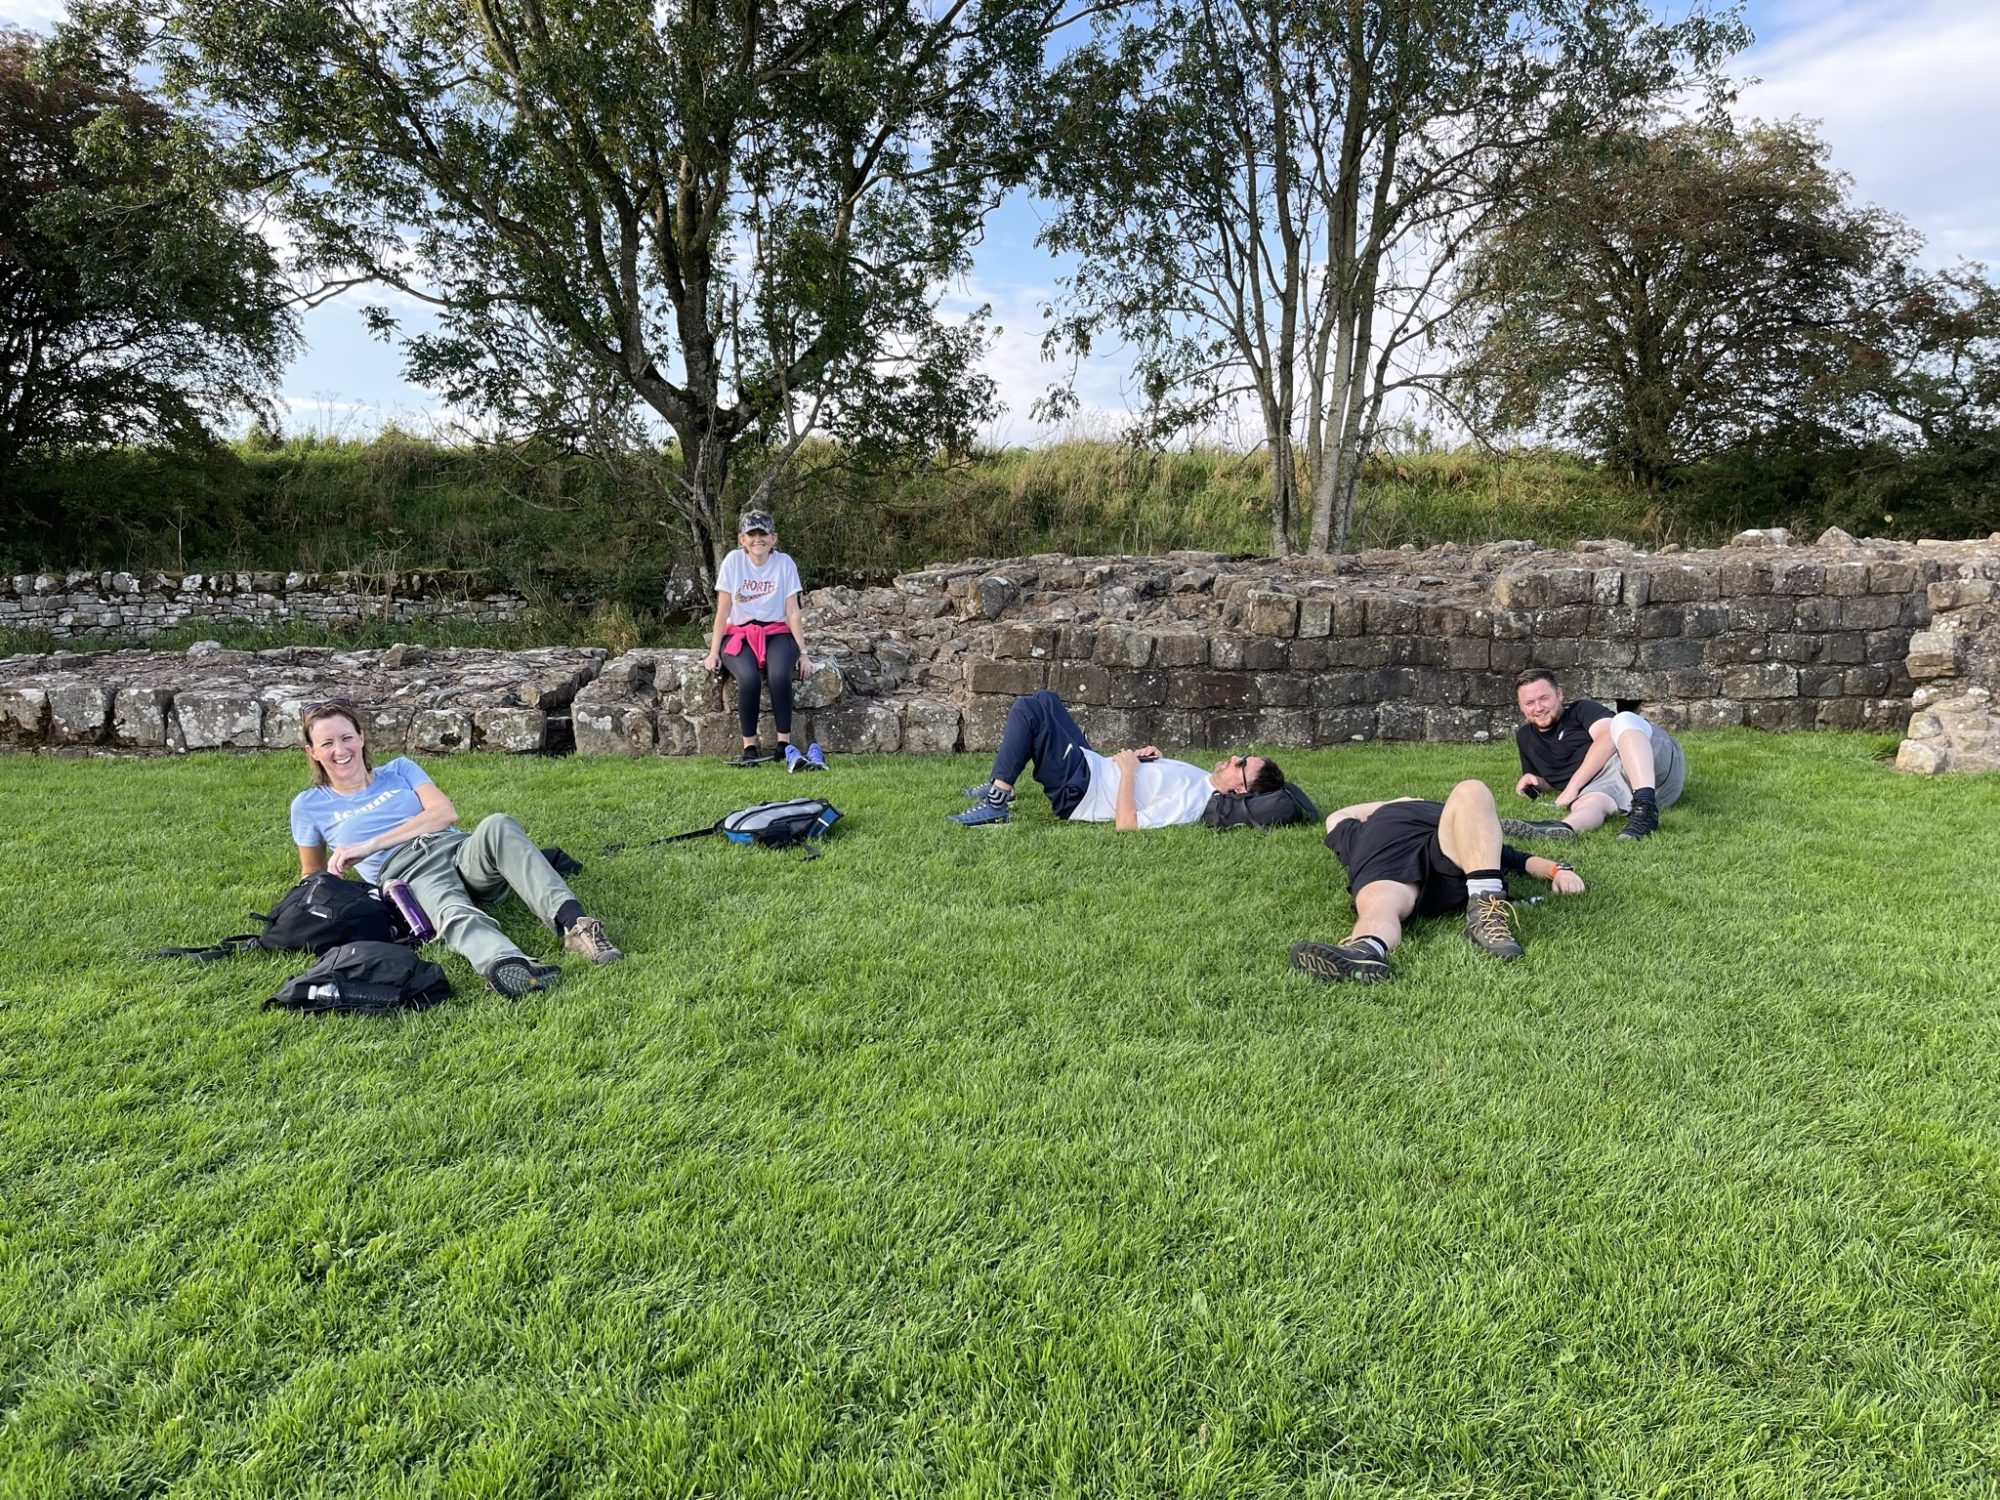 Our Hadrian’s Wall journey – blood, sweat and tears (the laughing kind)